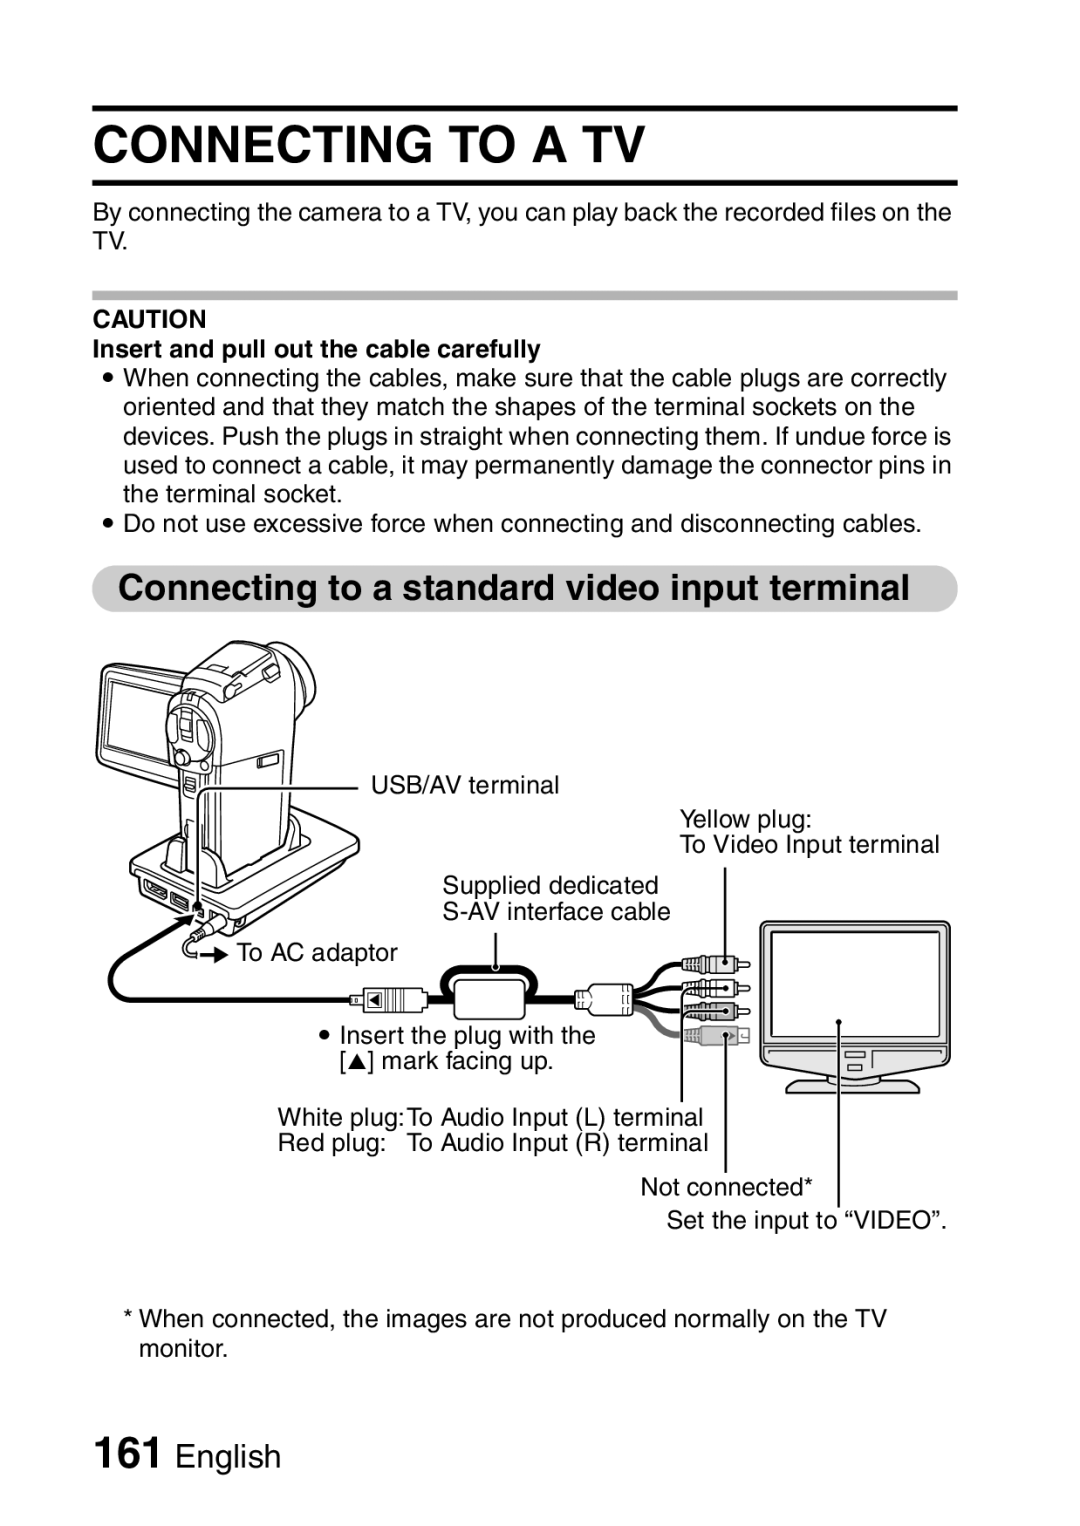 Sanyo VPC-HD2 Connecting to a TV, Connecting to a standard video input terminal, Insert and pull out the cable carefully 